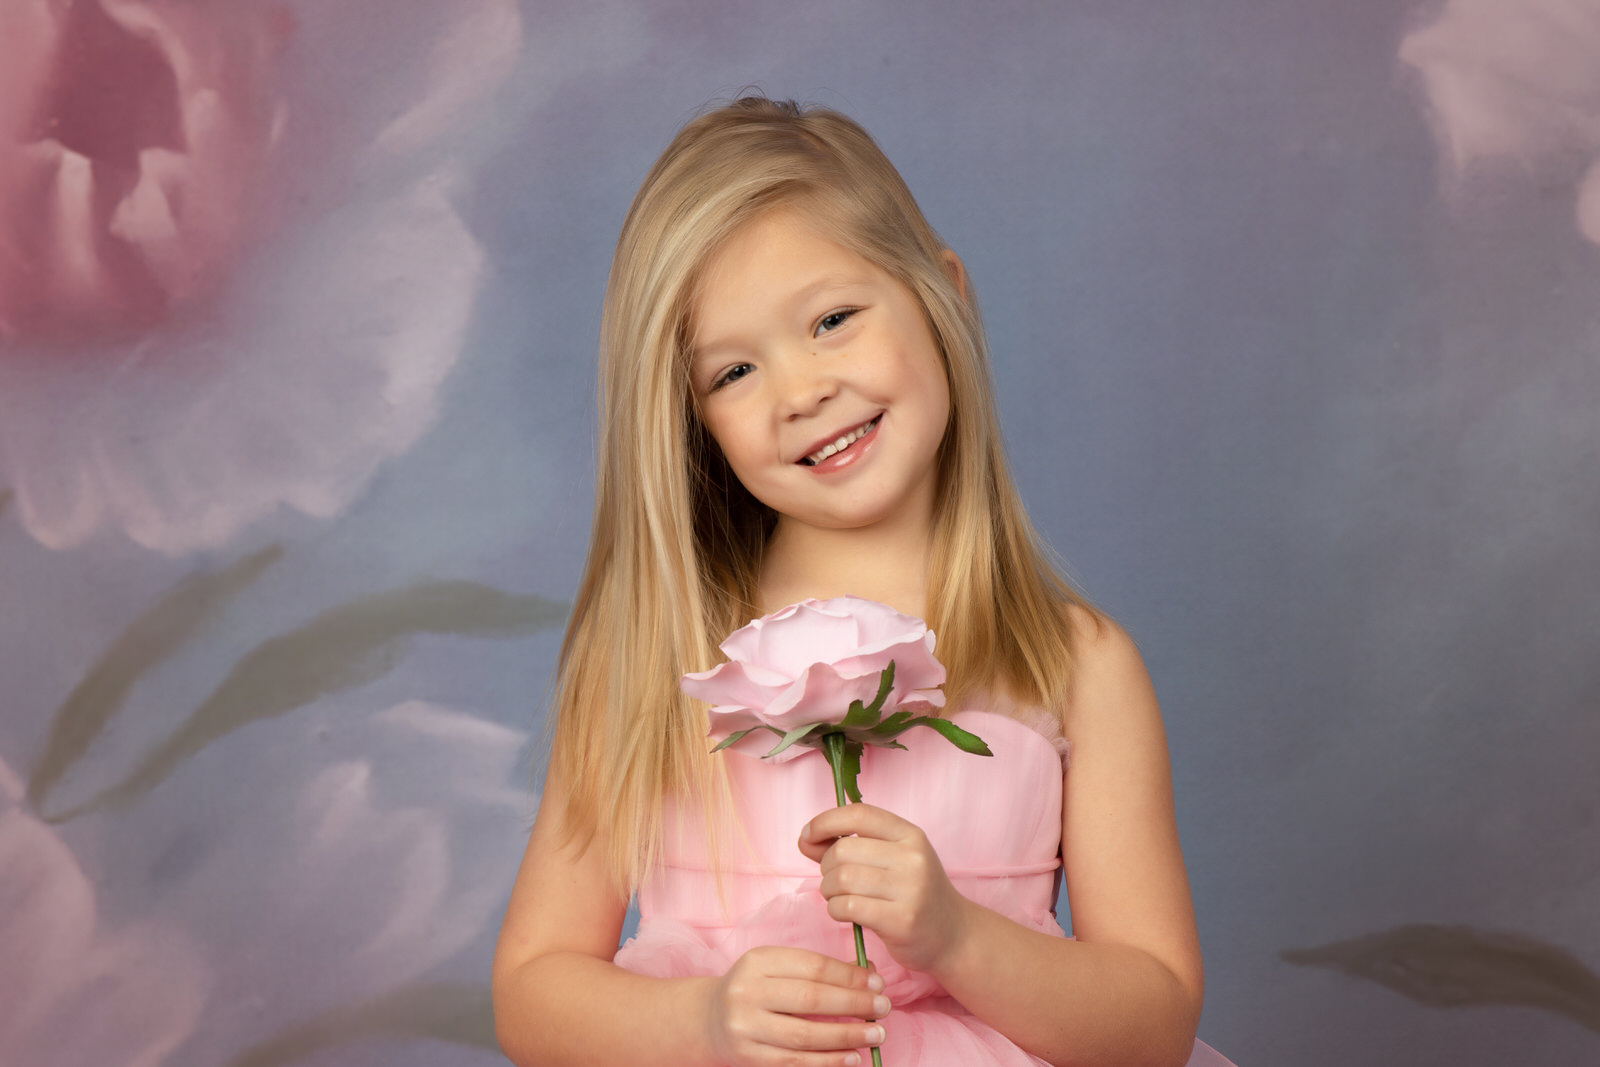 A young girl in a pink dress stands in a studio holding a large pink rose fort worth toy stores